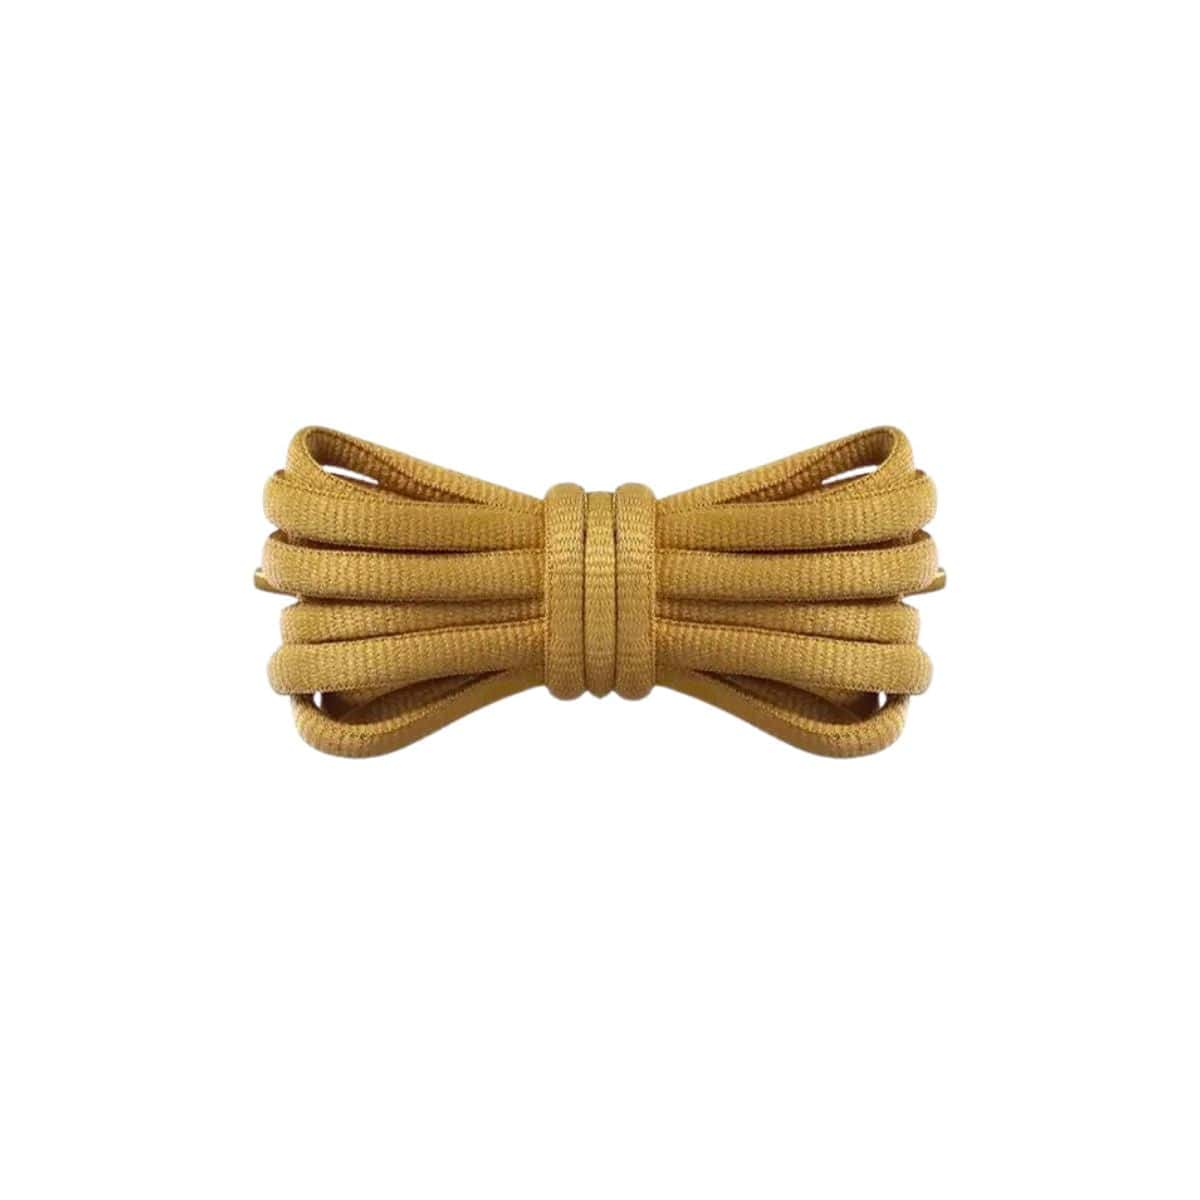 New Balance 1906 Shoe Lace Replacement Gold / 140 CM / 55 IN / Oval / 9mm Shoe Lace Replacement By Kicks Shoelaces